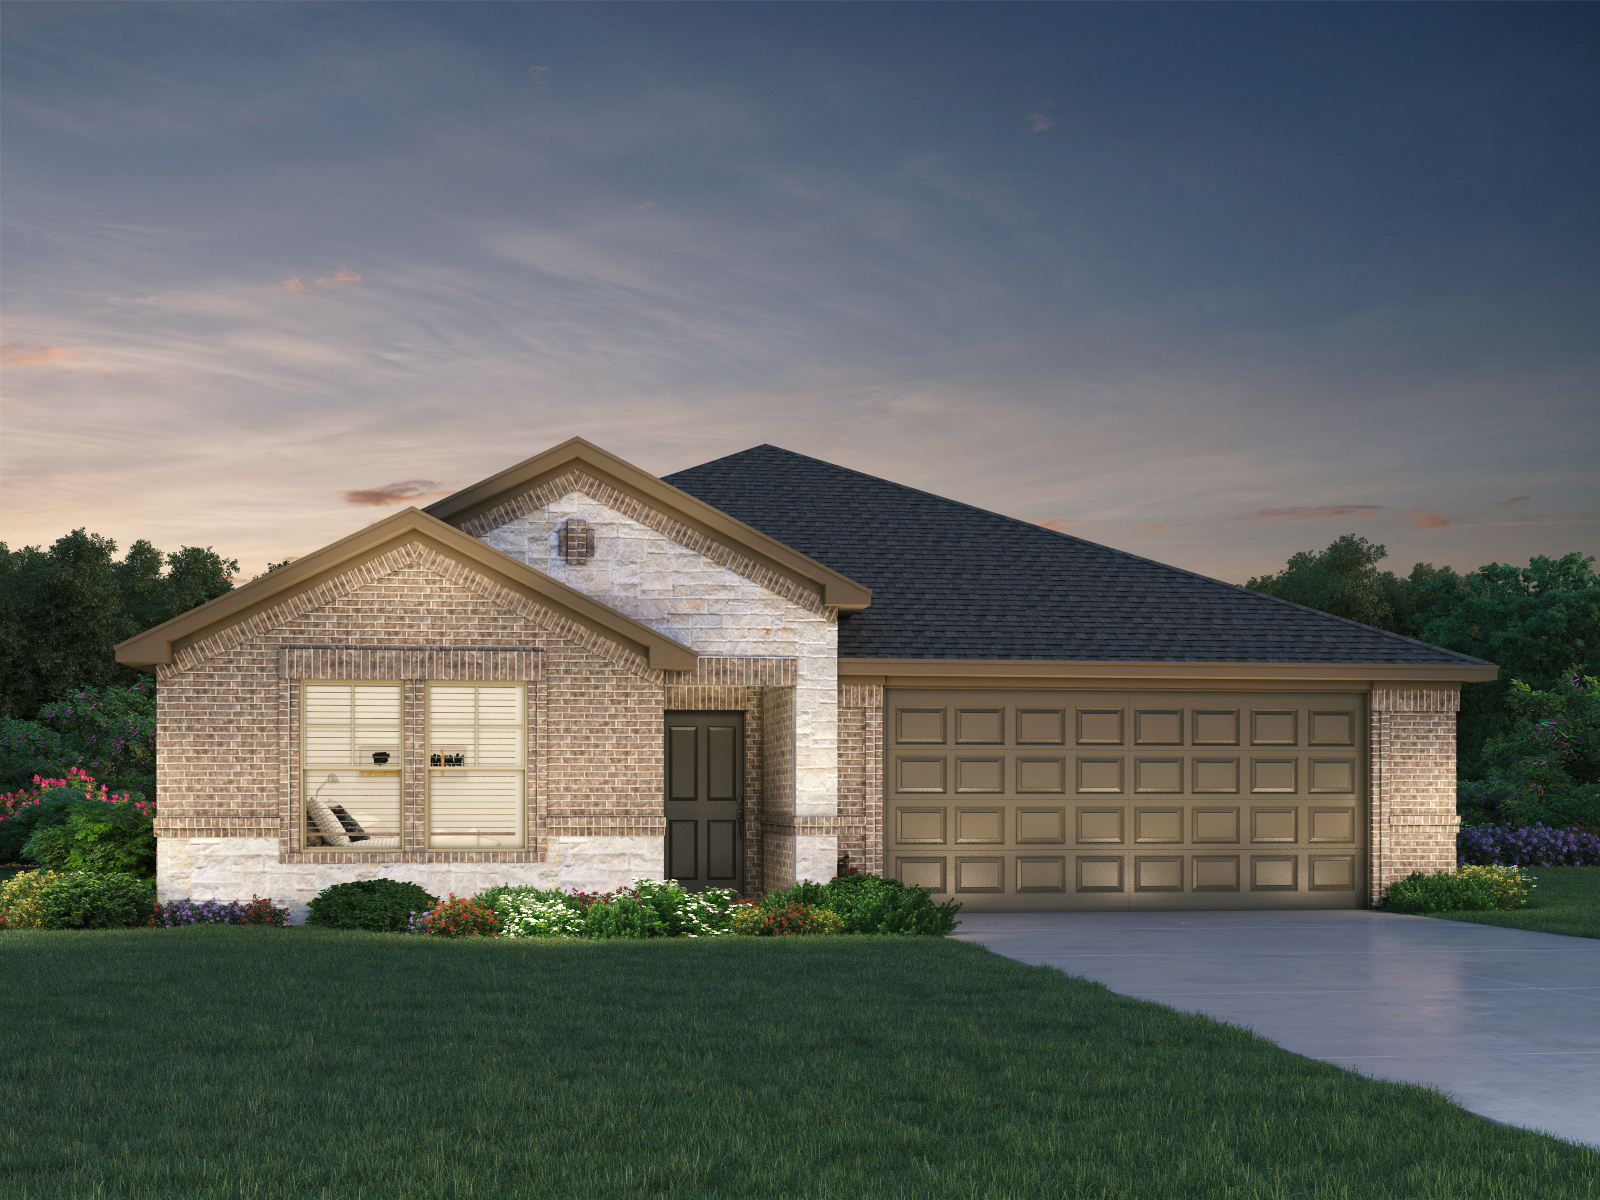 Meritage Homes buys land for Texas City community